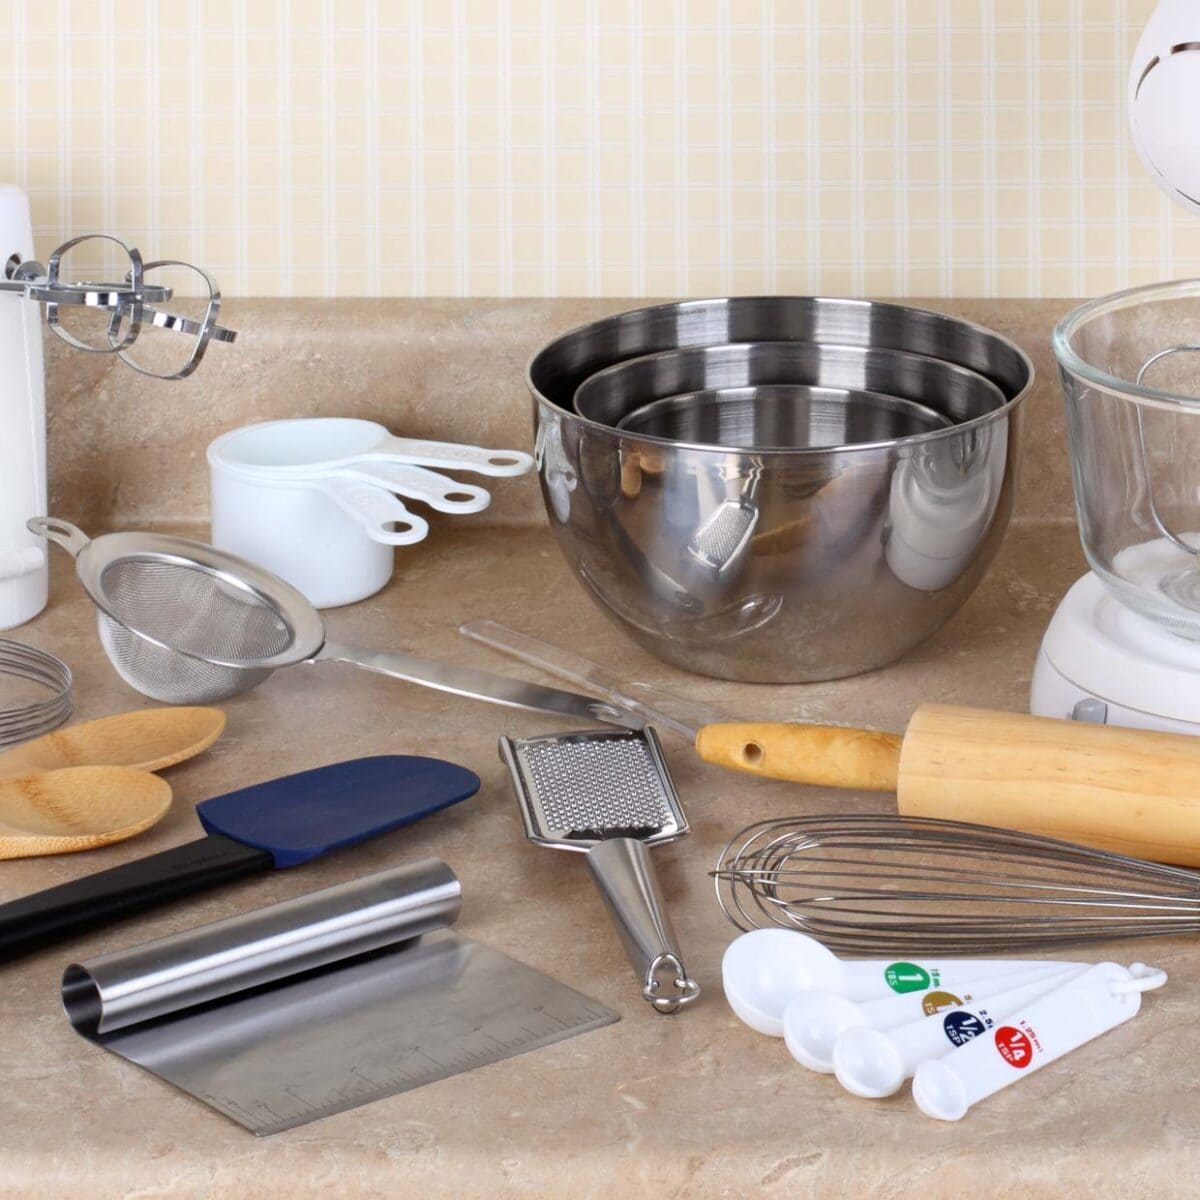 Baking tools on a countertop.